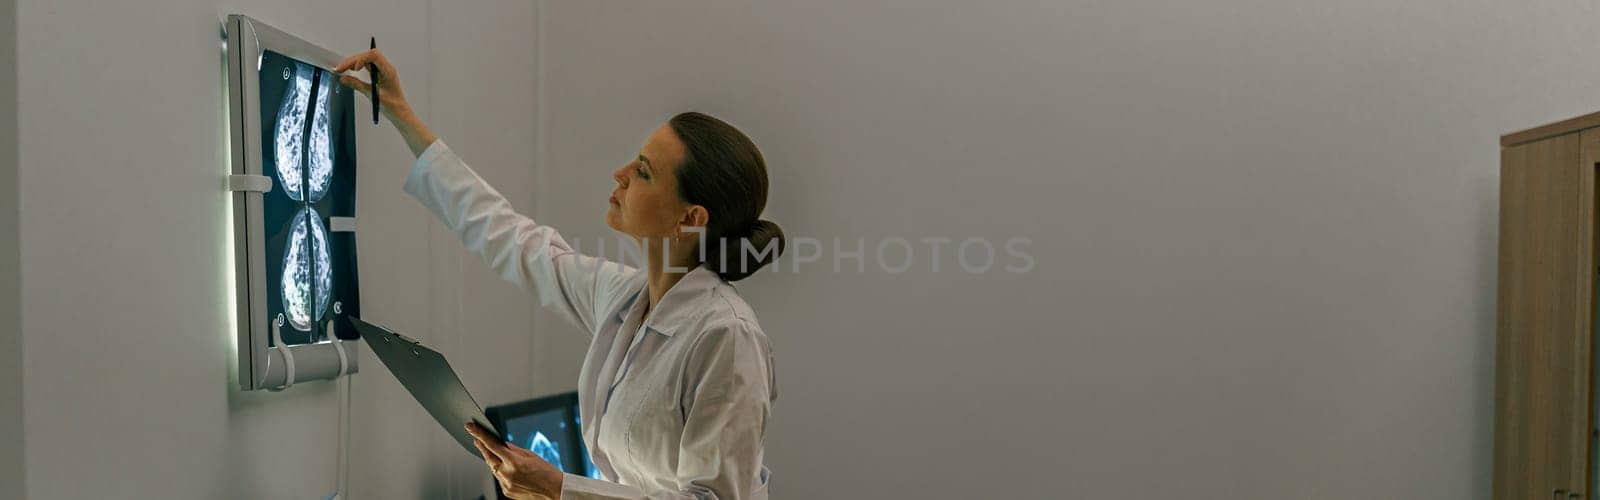 Side view of professional doctor radiologist analyzing scan MRI images in medical center by Yaroslav_astakhov